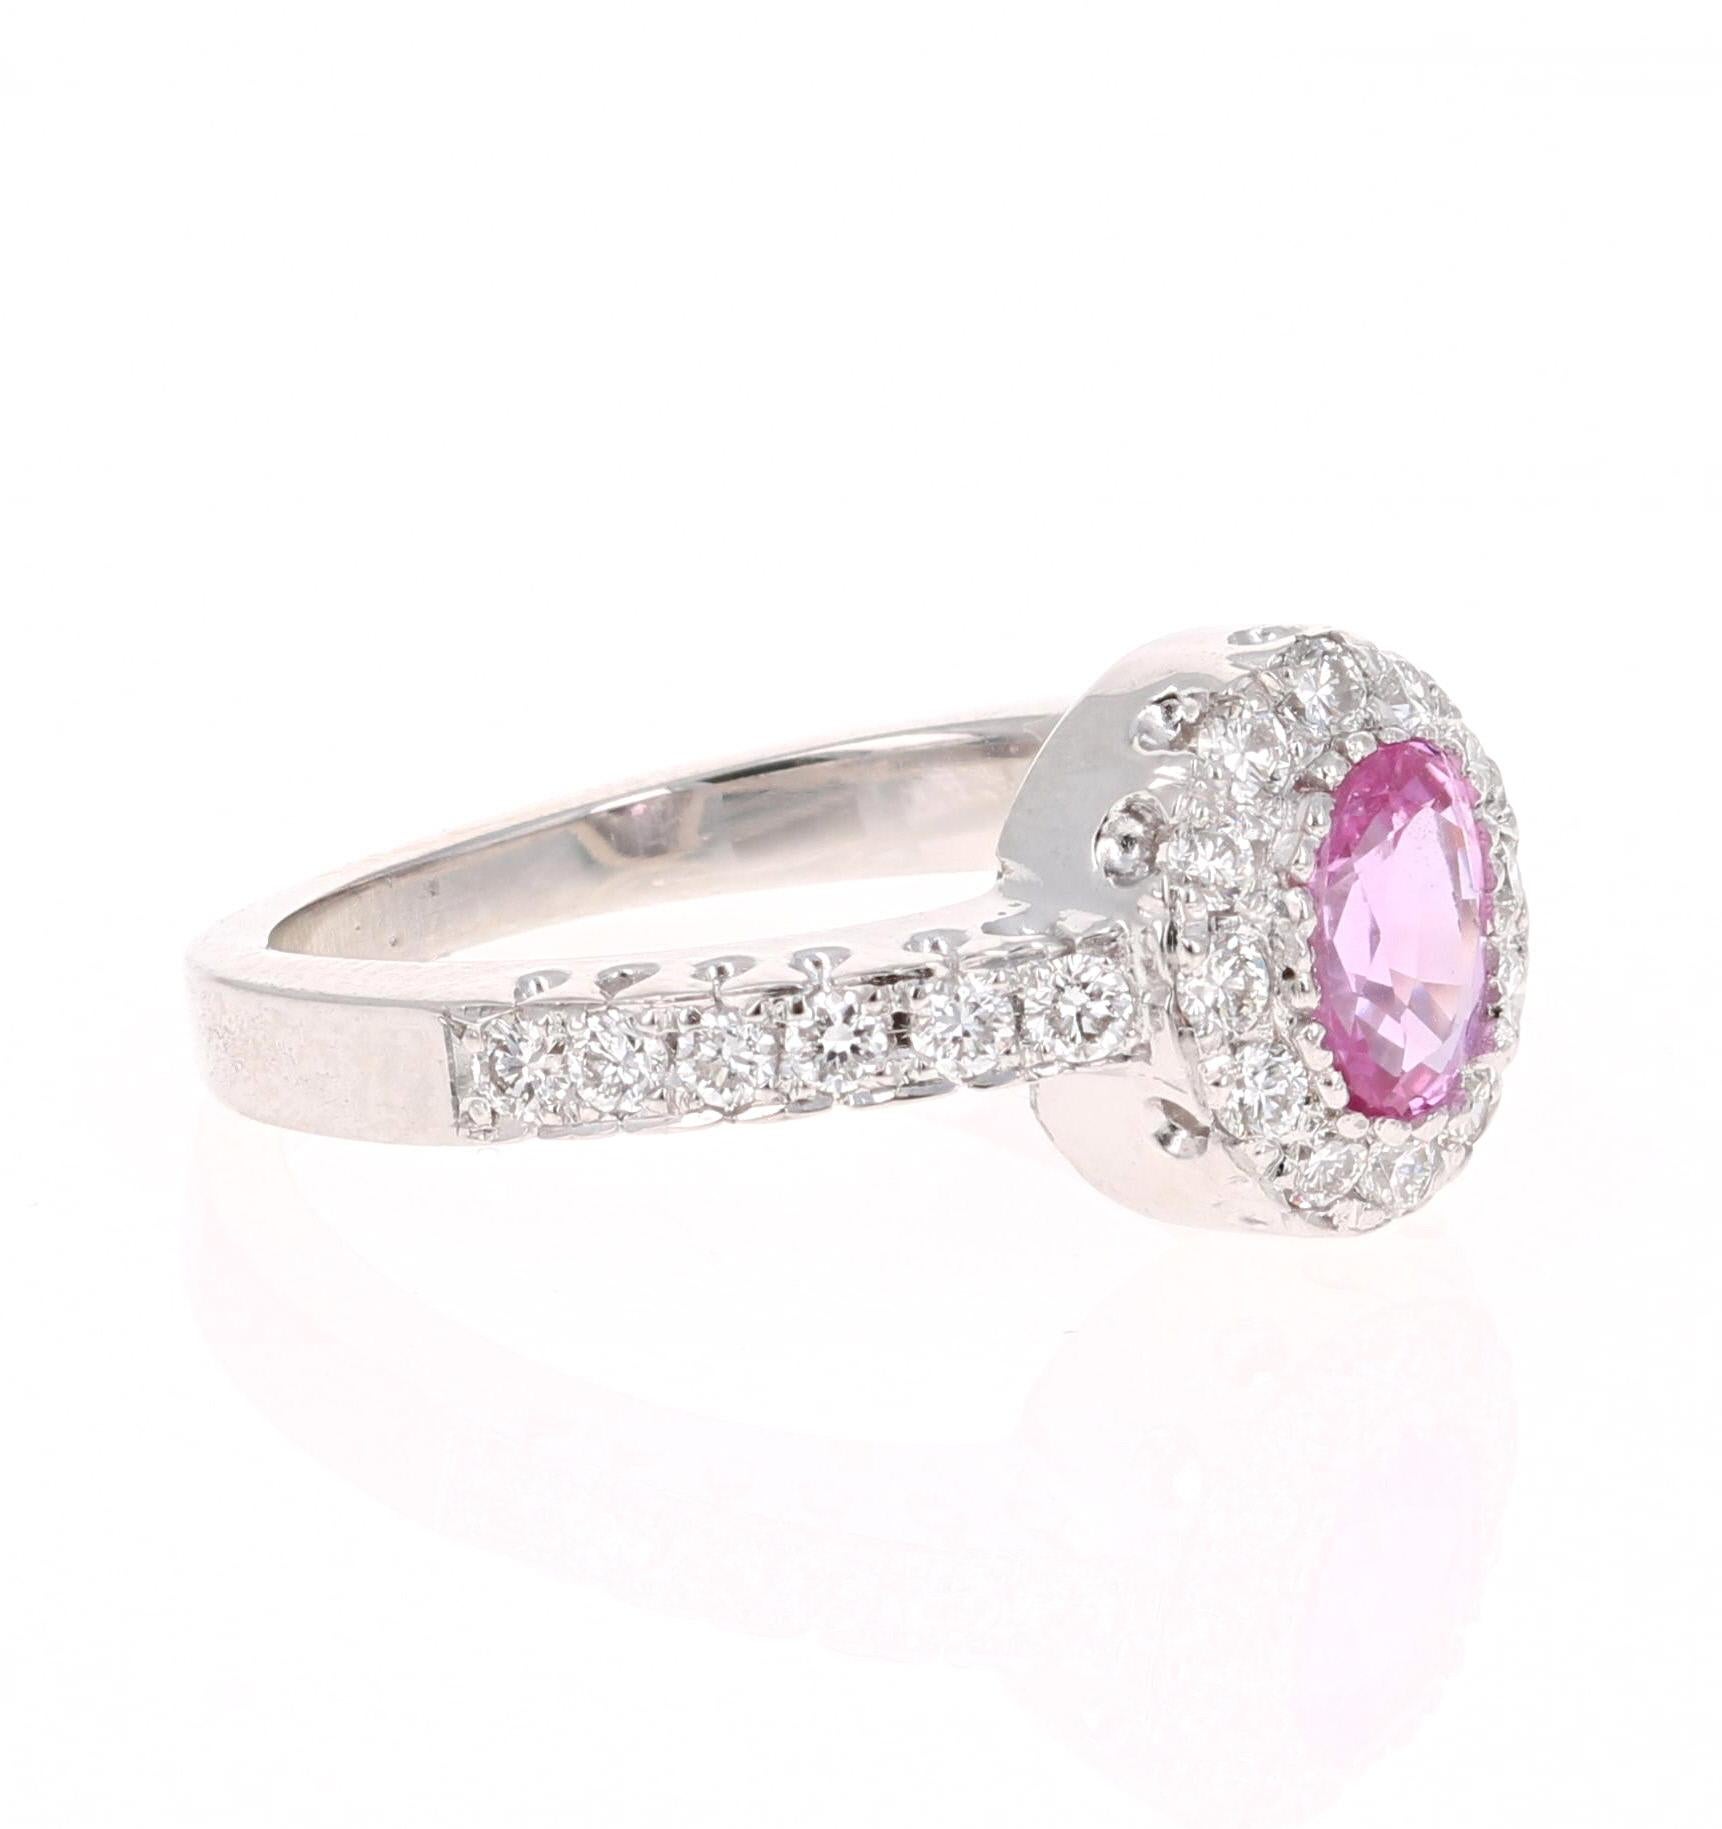 Cute Pink Sapphire and Diamond Ring! Can be an everyday ring or a unique Engagement Ring!

This beautiful ring has a Oval Cut Pink Sapphire that weighs 0.69 Carats. 

The ring is embellished with 24 Round Cut Diamonds that weigh 0.44 Carats with a